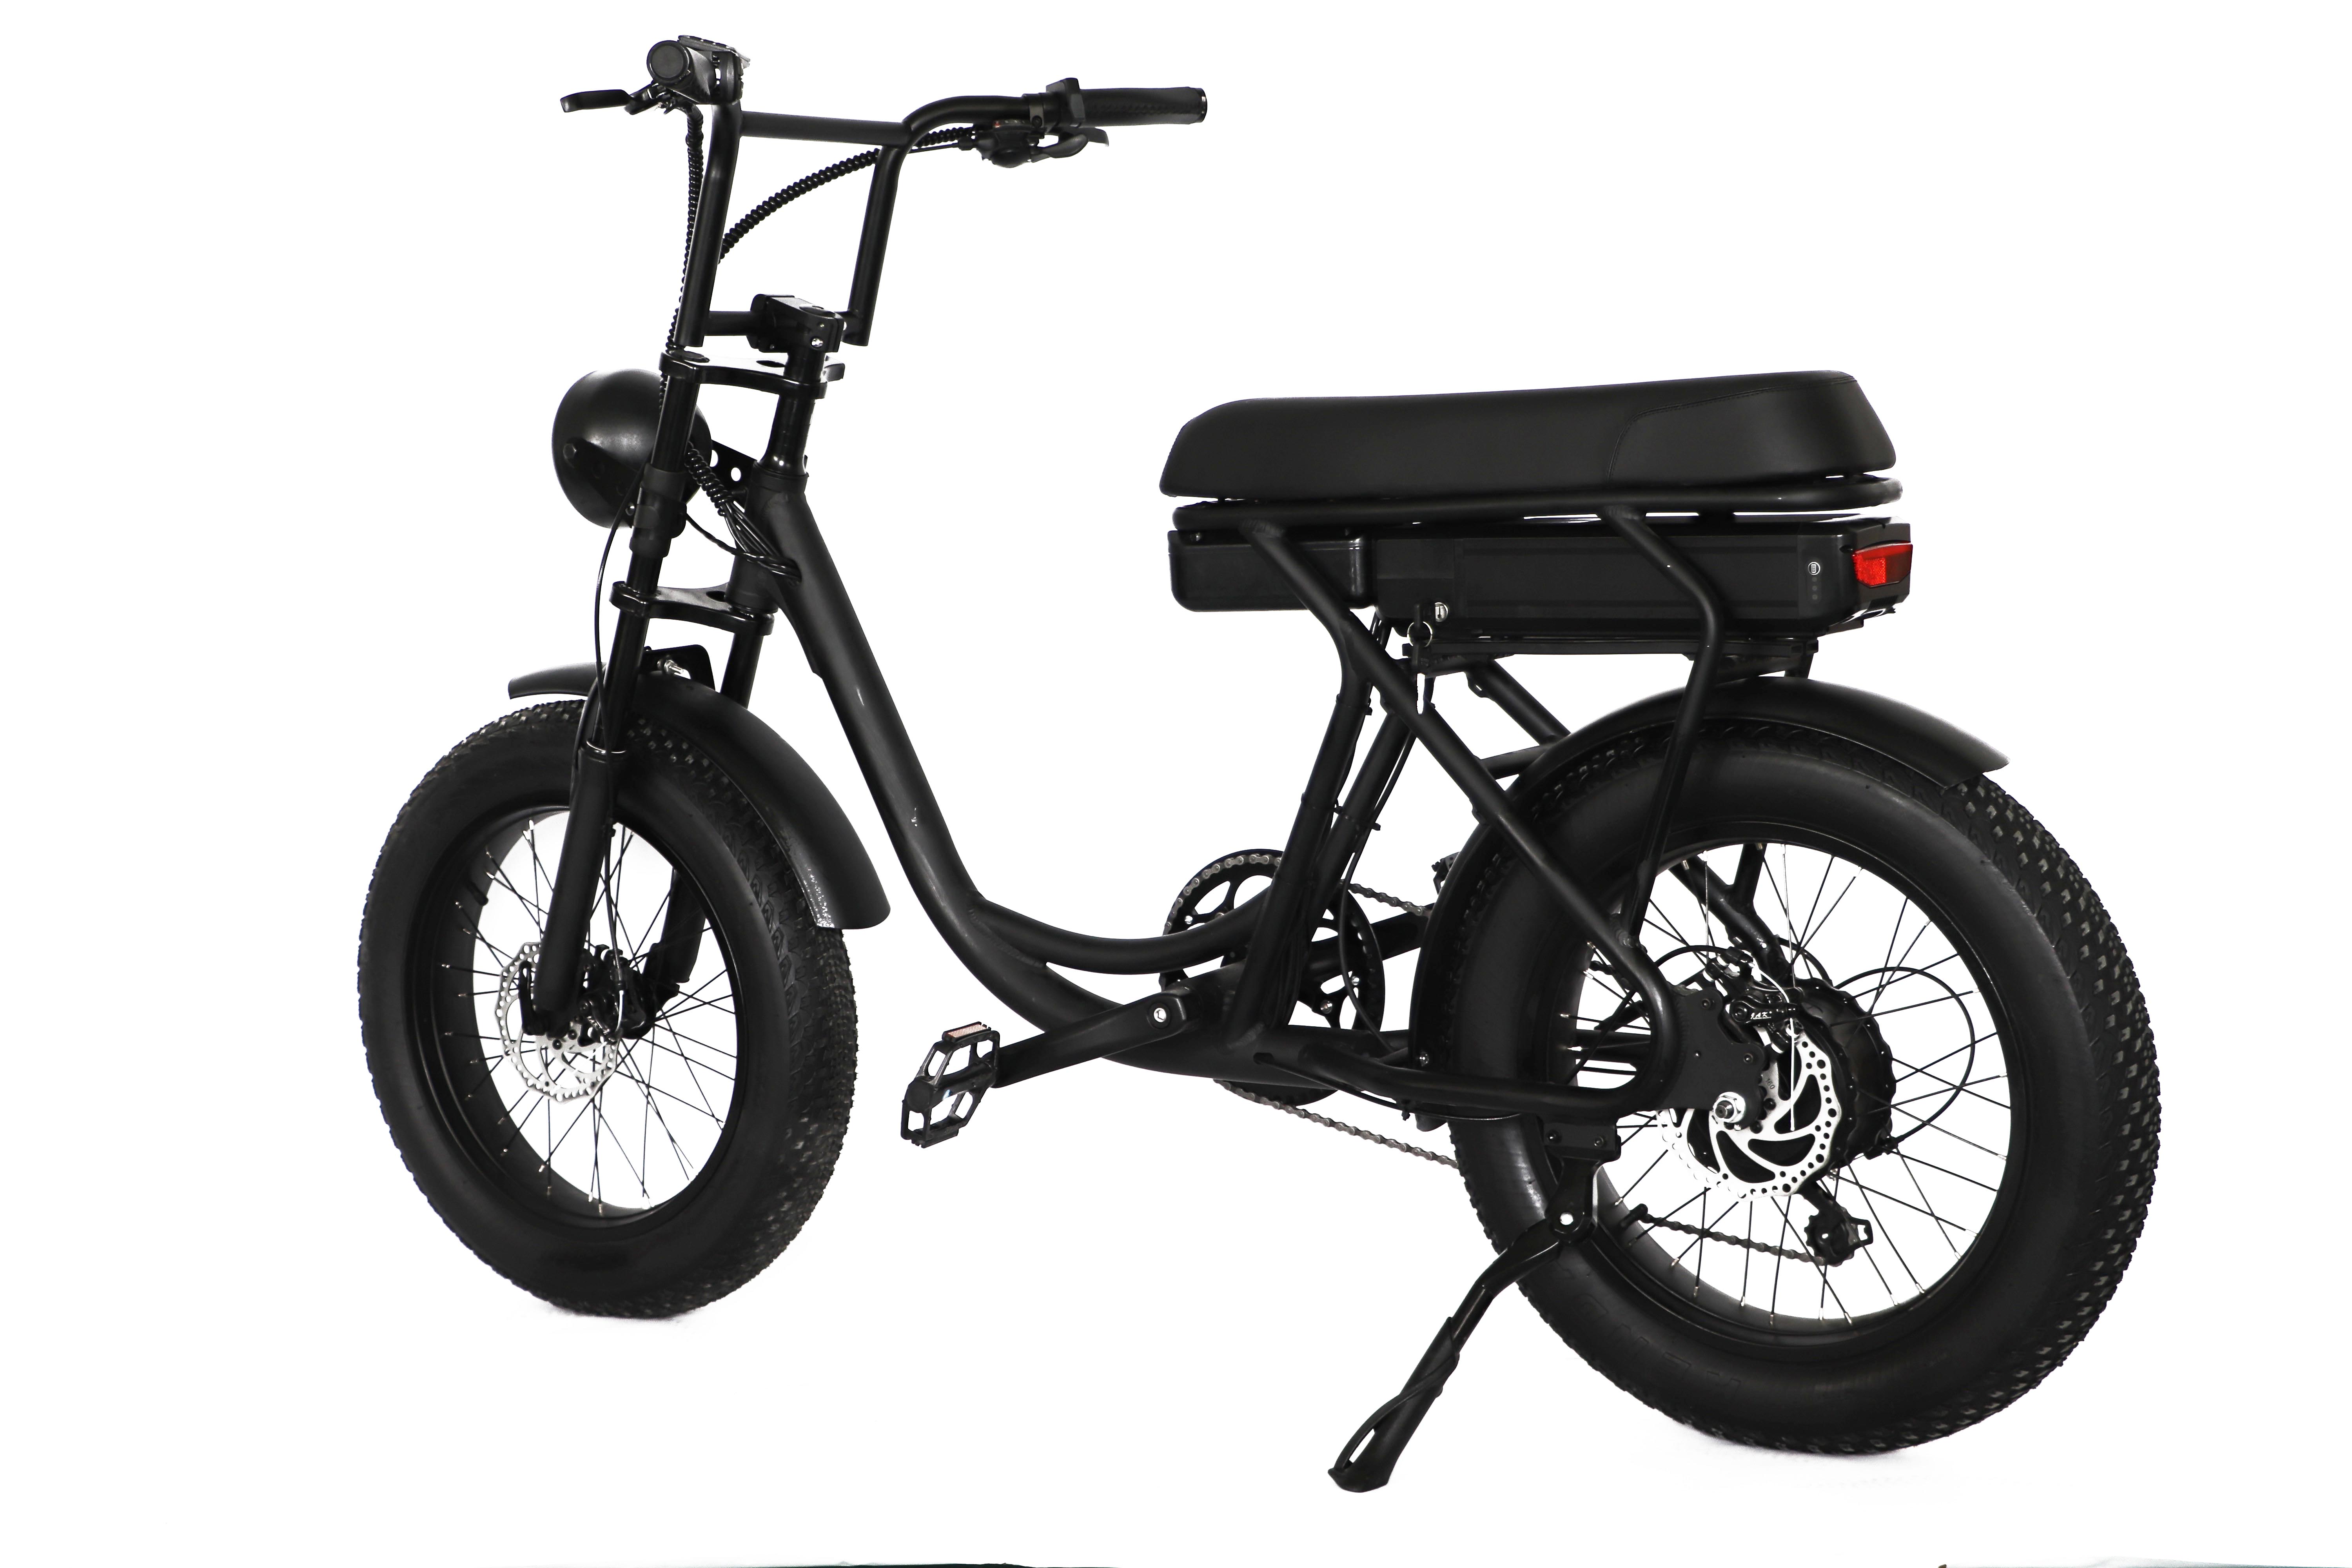 high quality 500W motor High carbon steel fork electric bicycle Aluminum alloy frame ebike for women